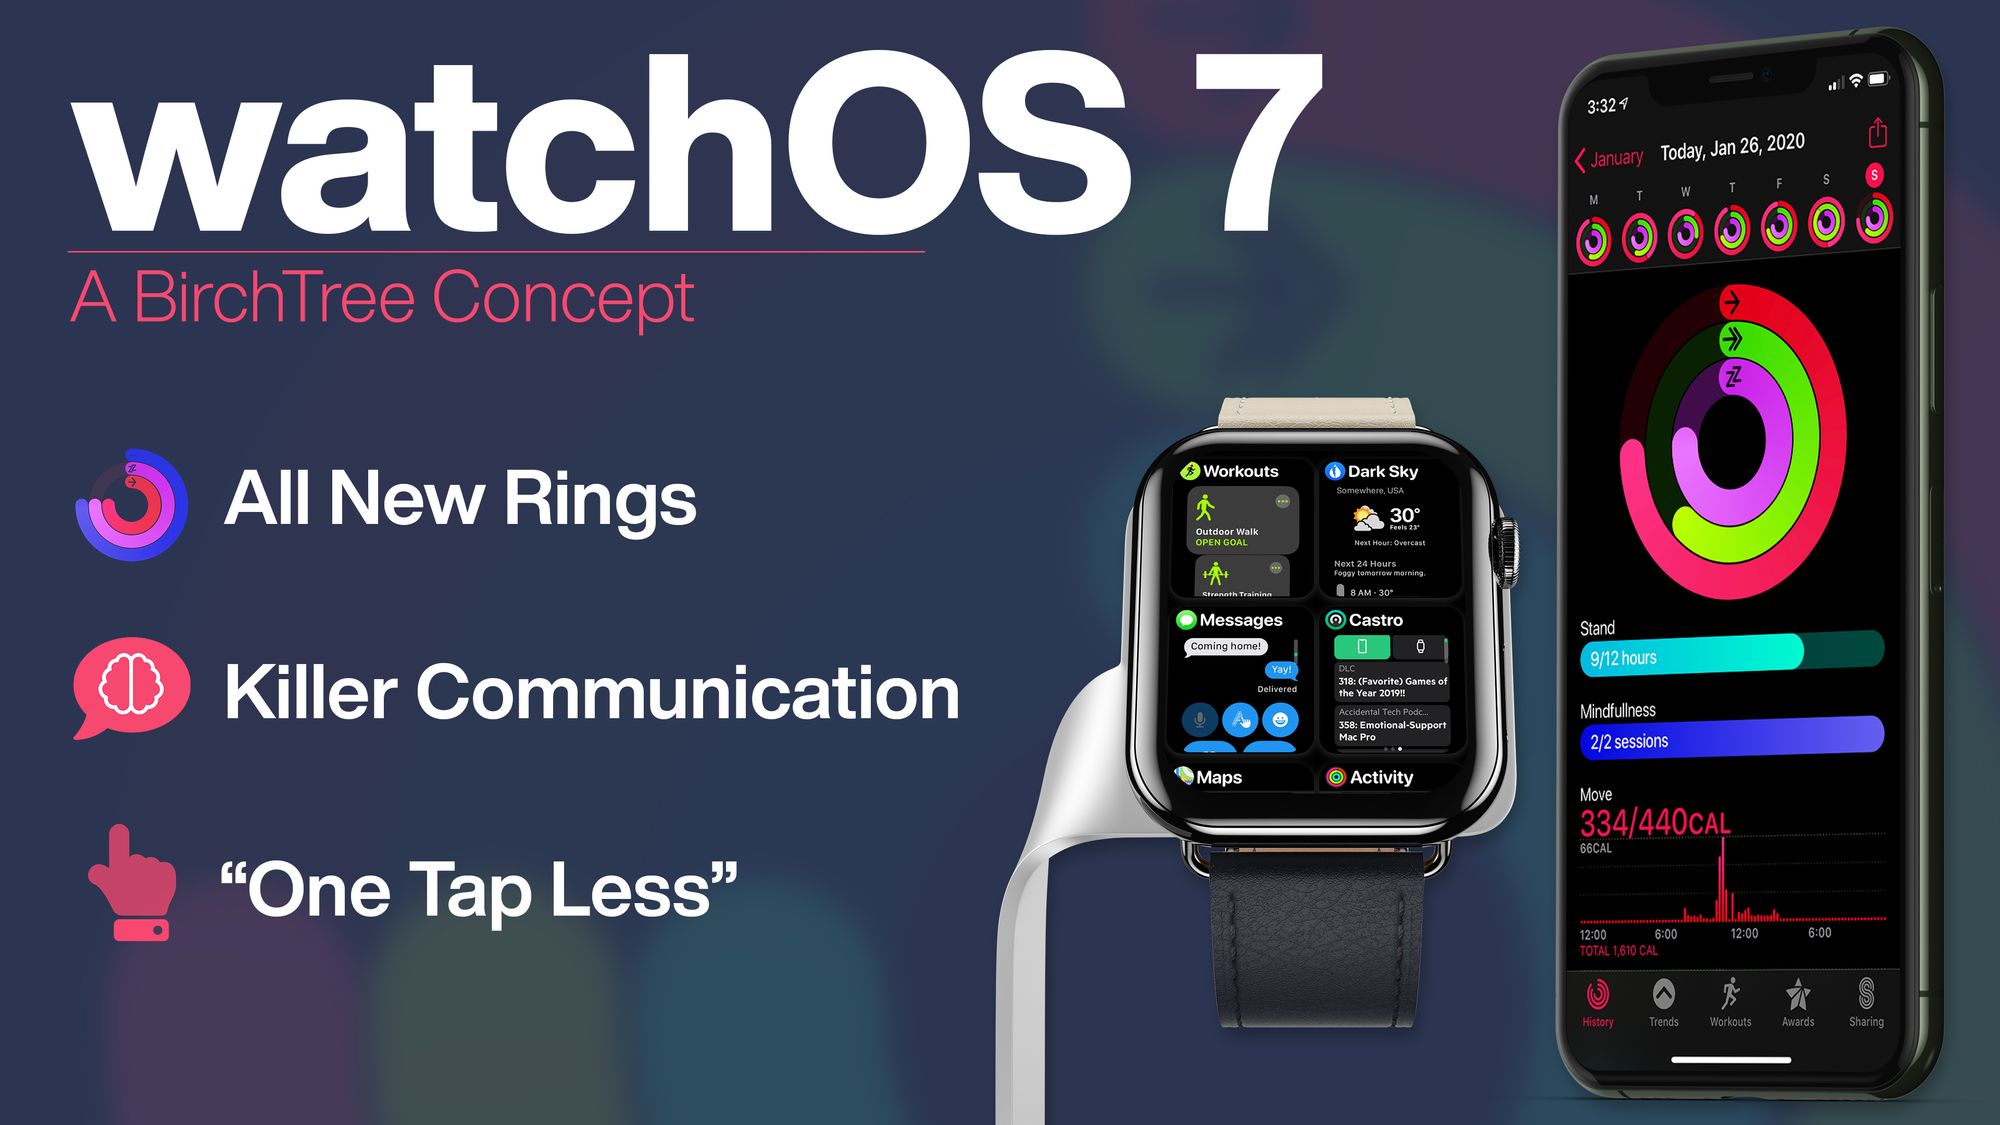 watchOS 7: A BirchTree Concept